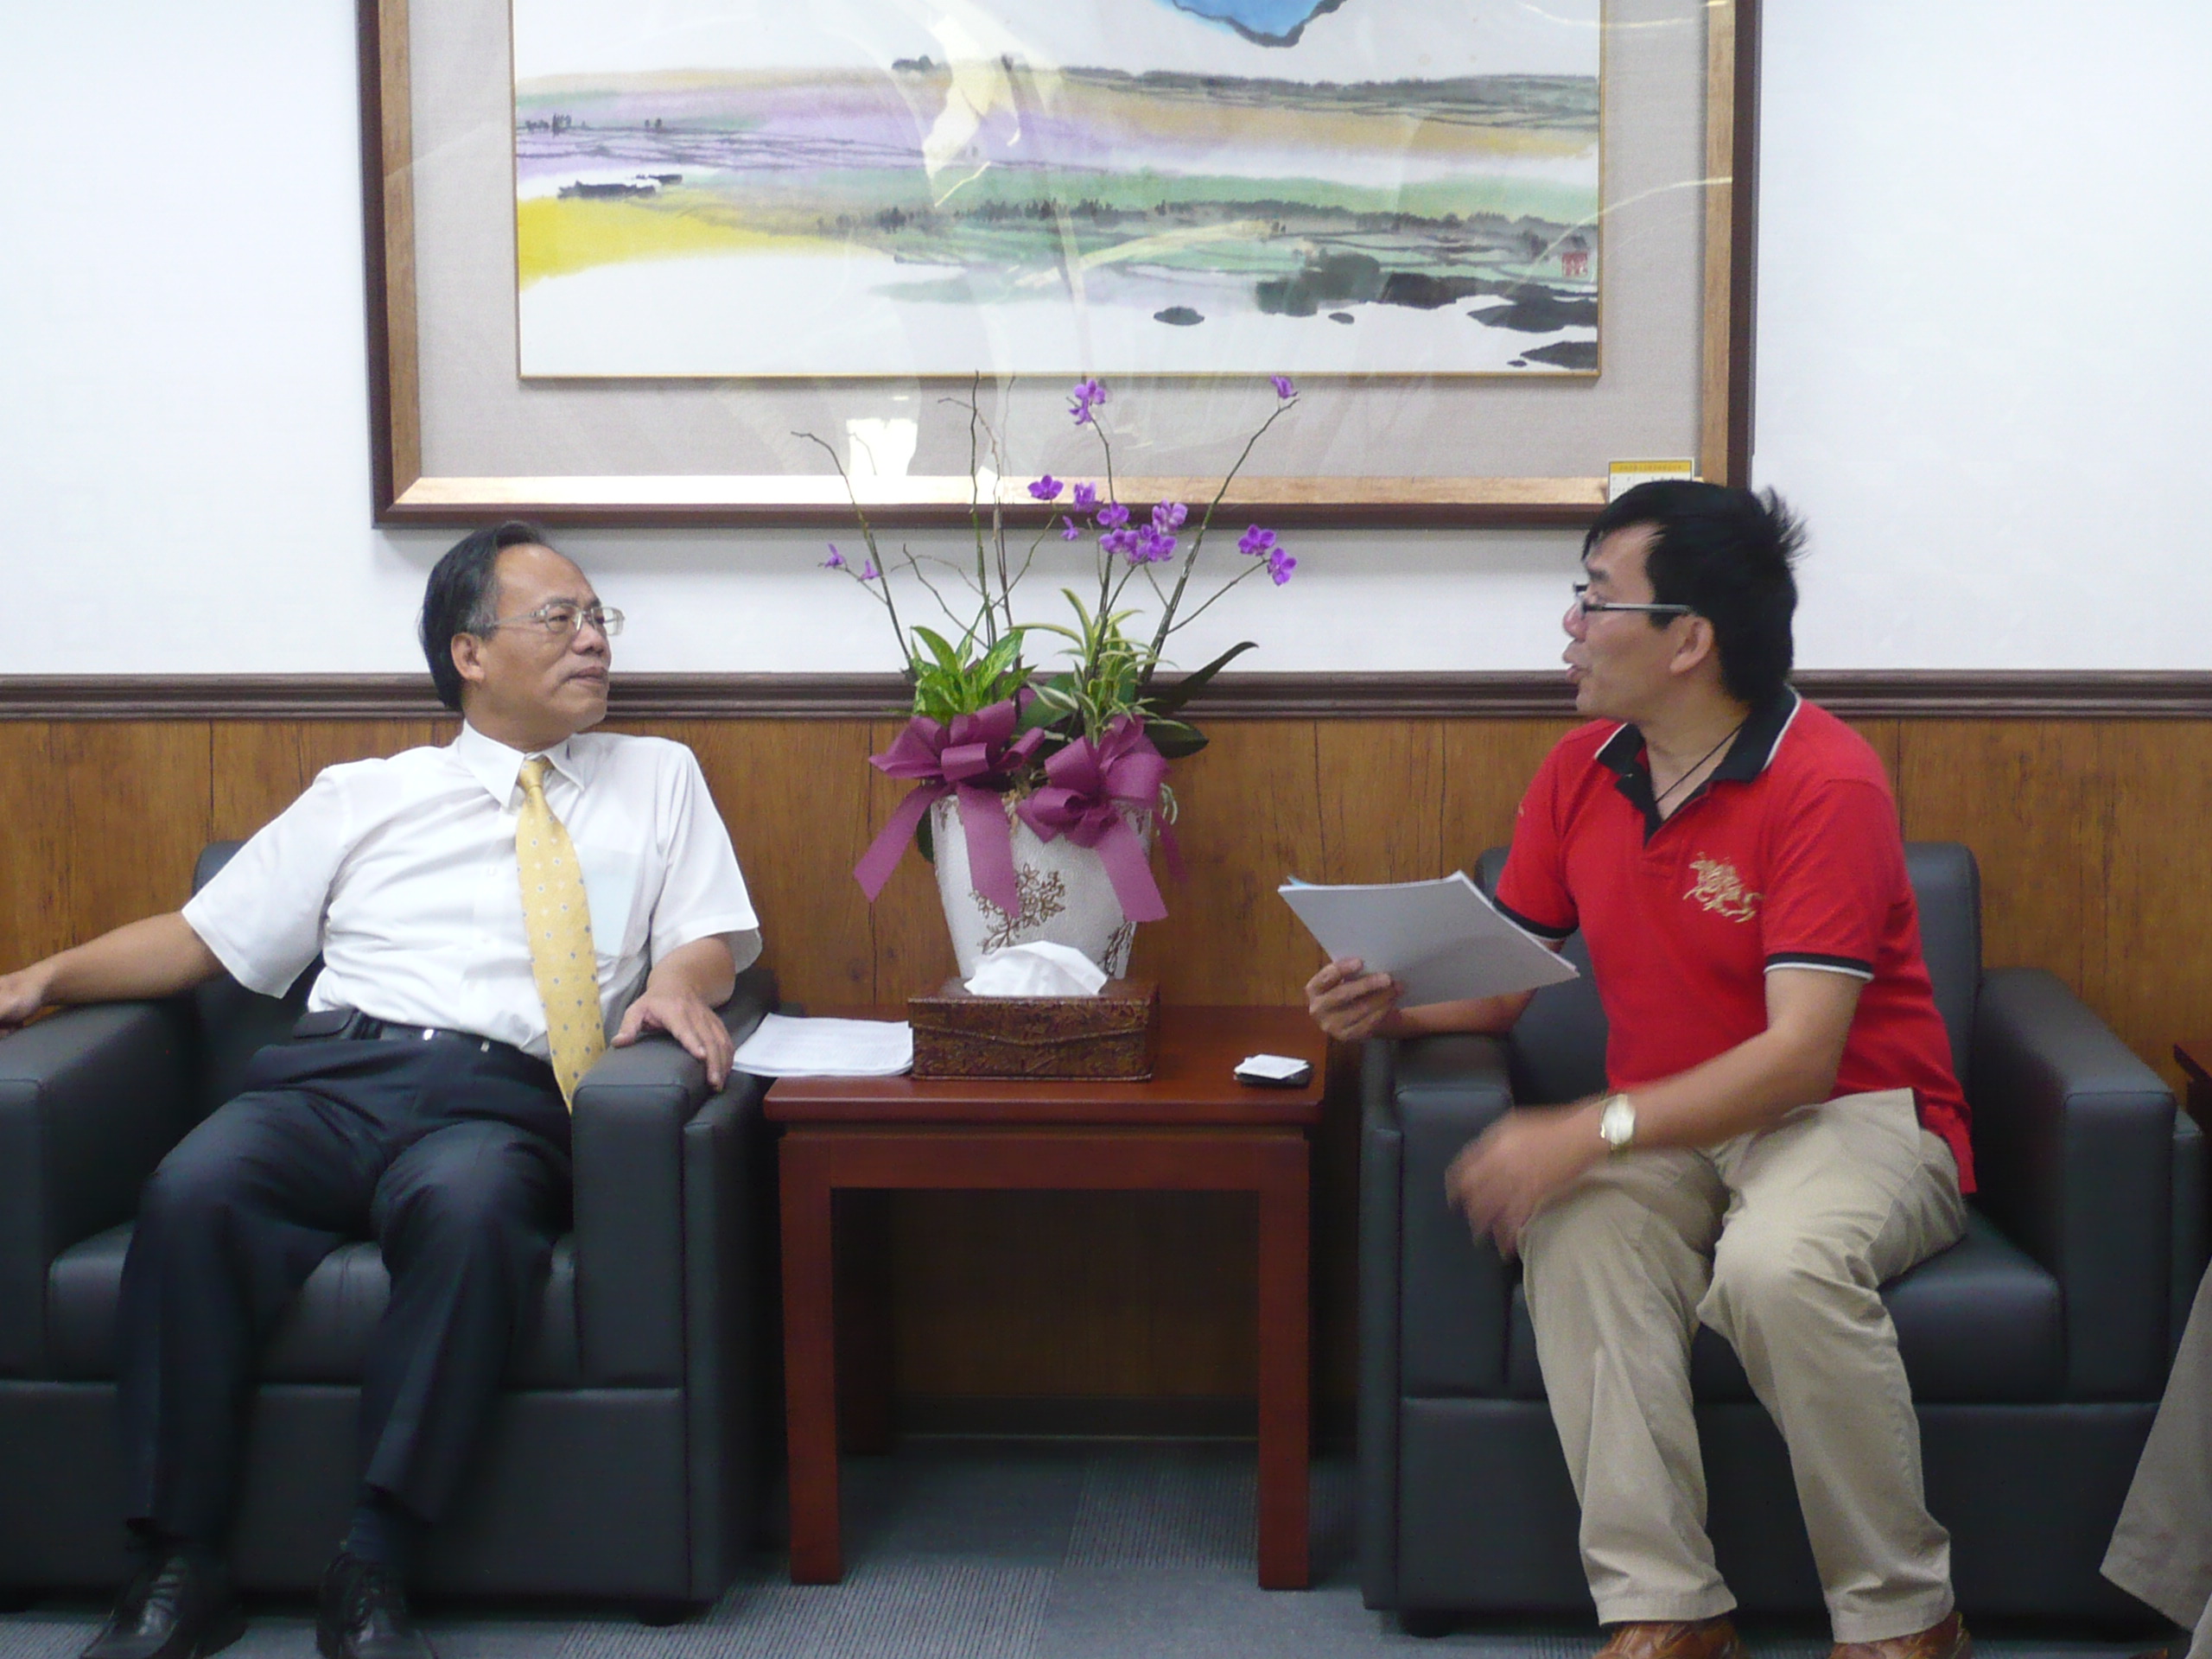 Director General Chou of the Agency Against Corruption, and Director Liao Ran of the Asia Pacific Division in Transparency International happily discuss civil ethics issues.